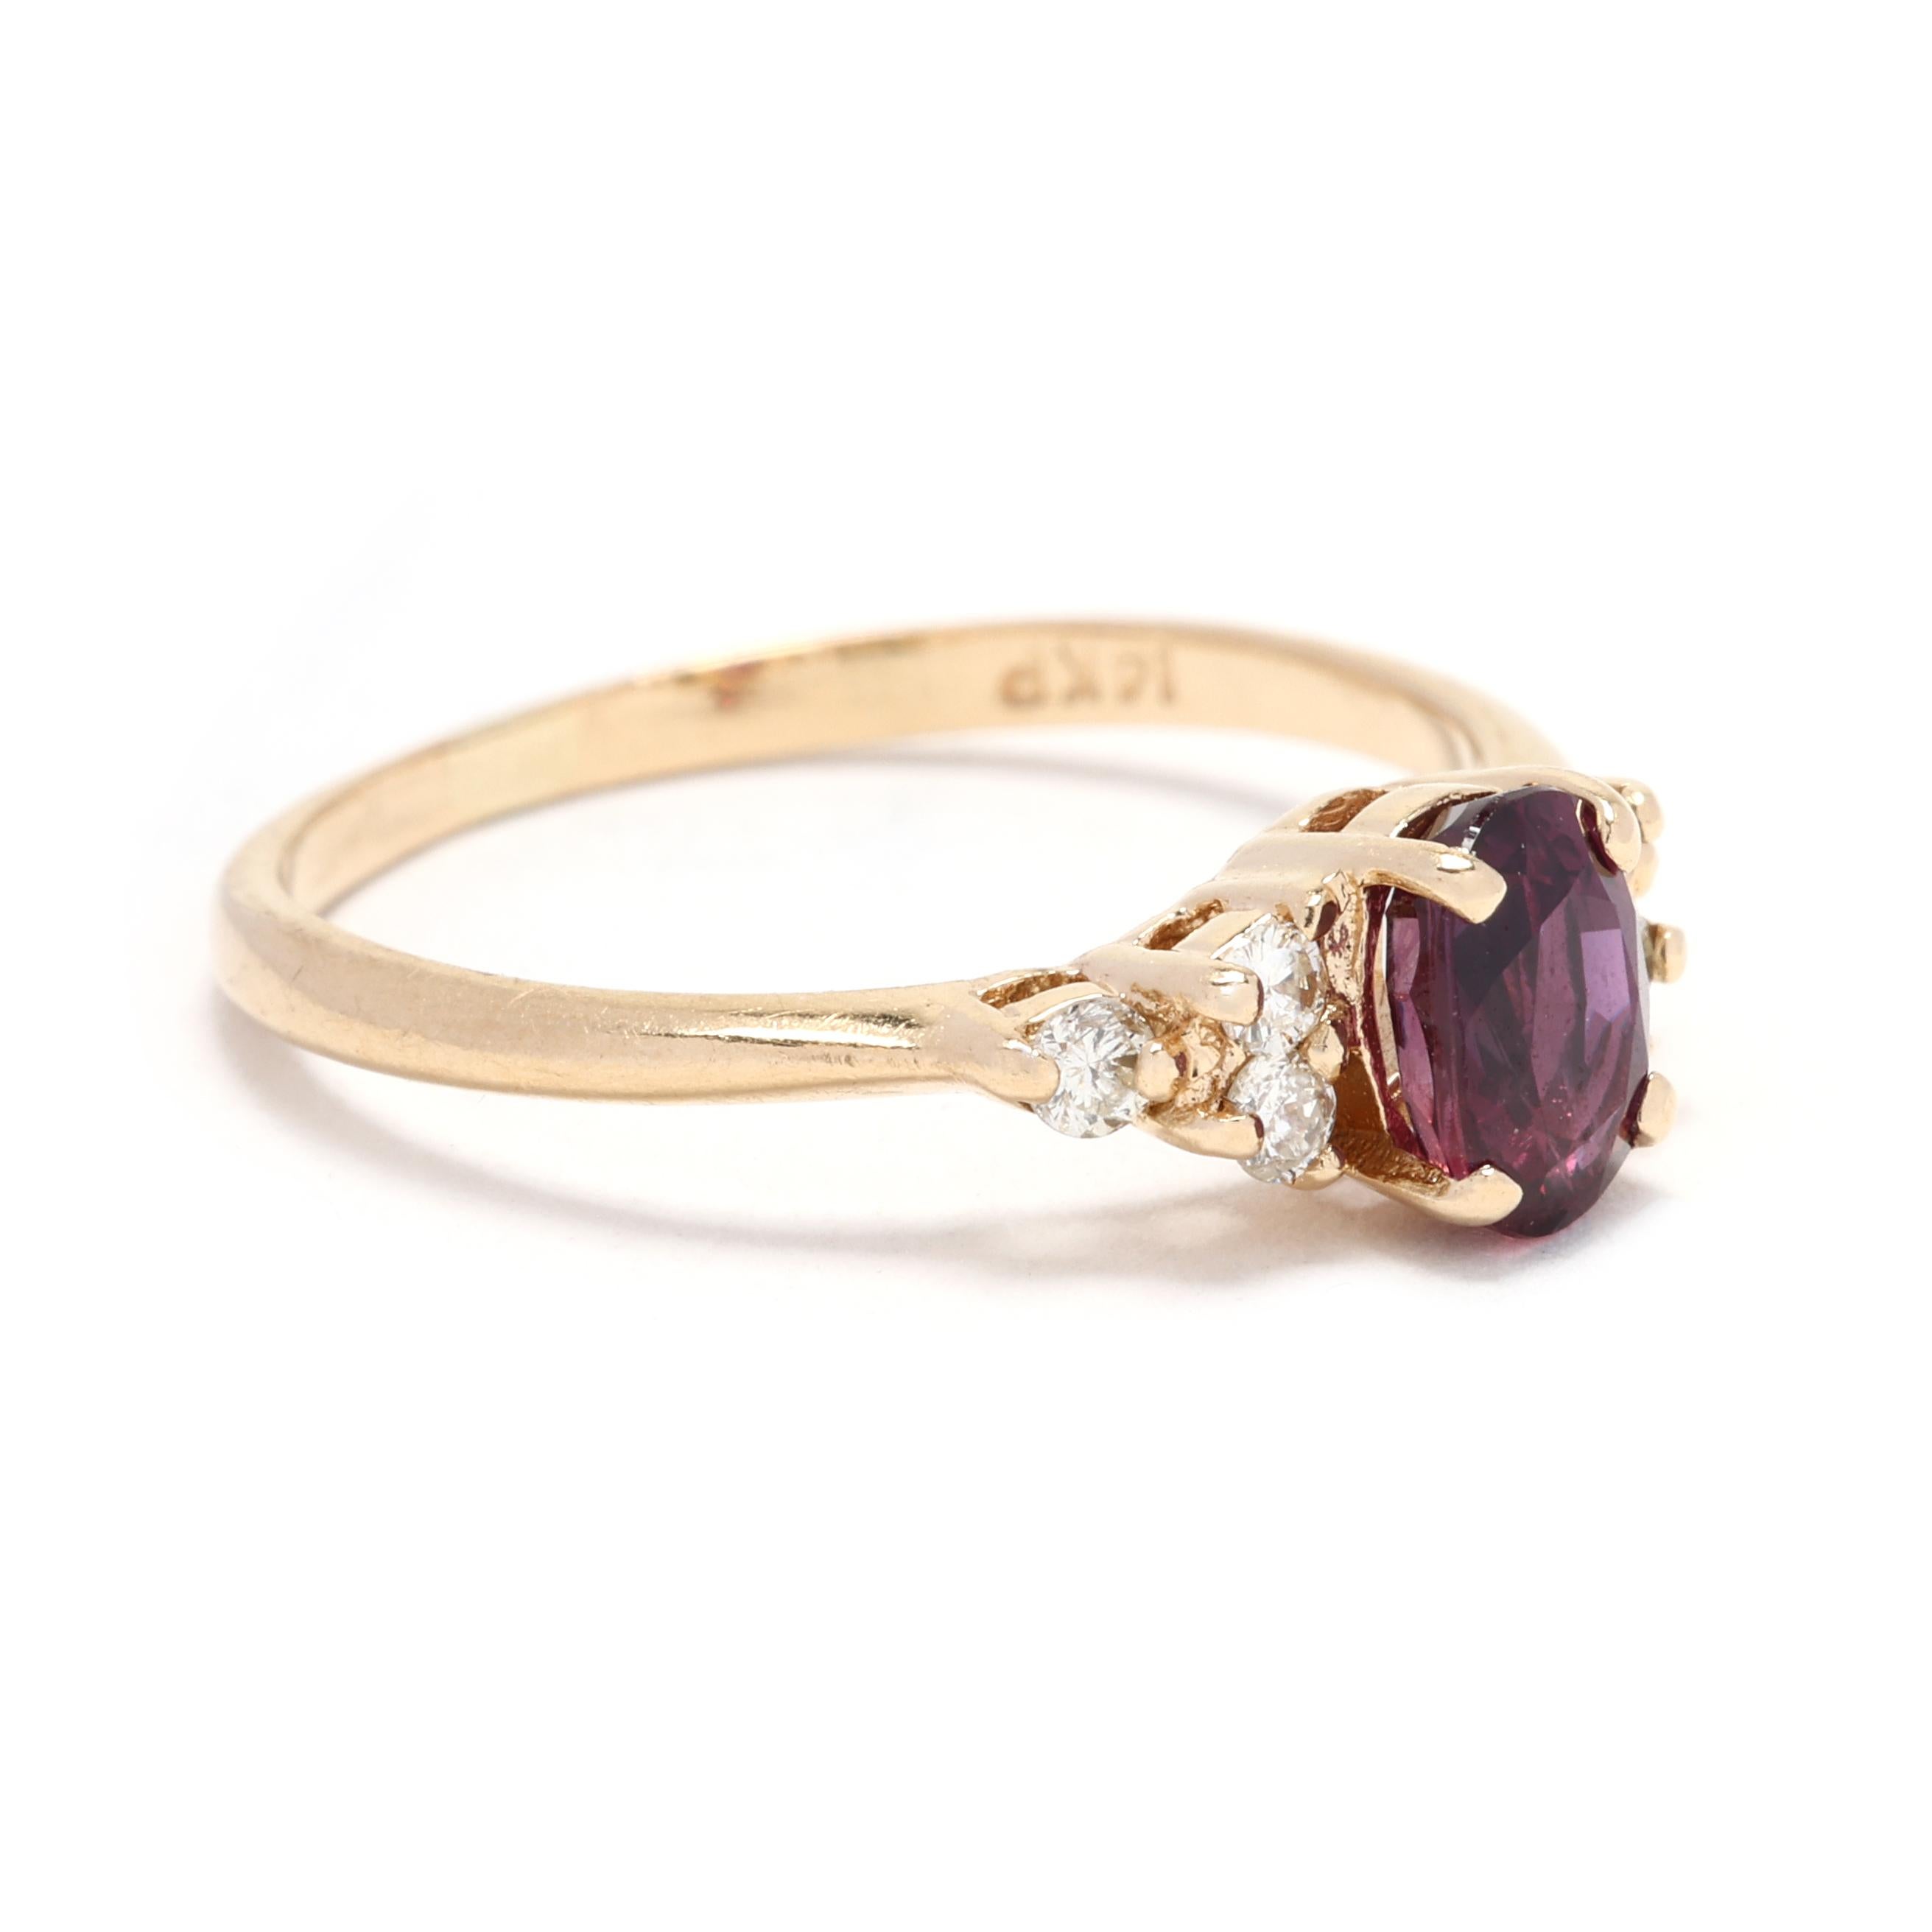 This 0.80ctw Ruby & Diamond Engagement Ring is a stunning piece of jewelry that is sure to capture attention. Crafted in 14k yellow gold, this ring features a vibrant 0.70ct ruby center stone surrounded by 0.10ctw round diamonds. The ruby's deep red